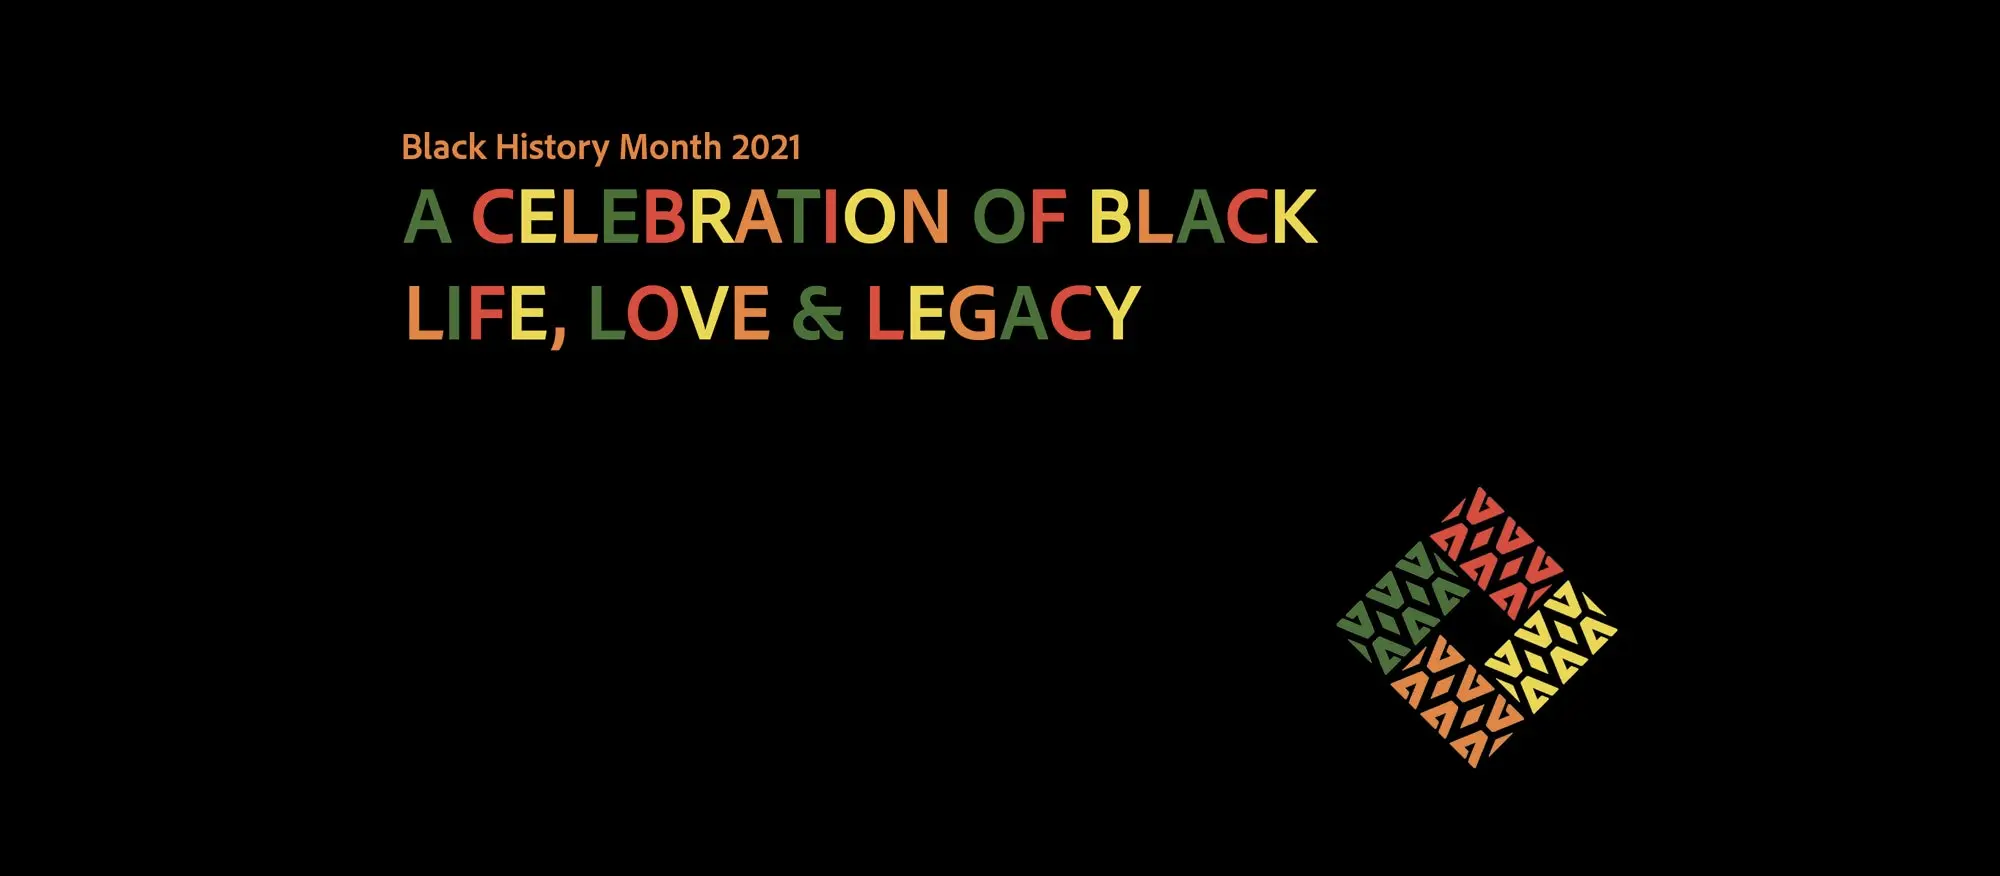 Black History Month 2021, a celebration of Black life, love and legacy.